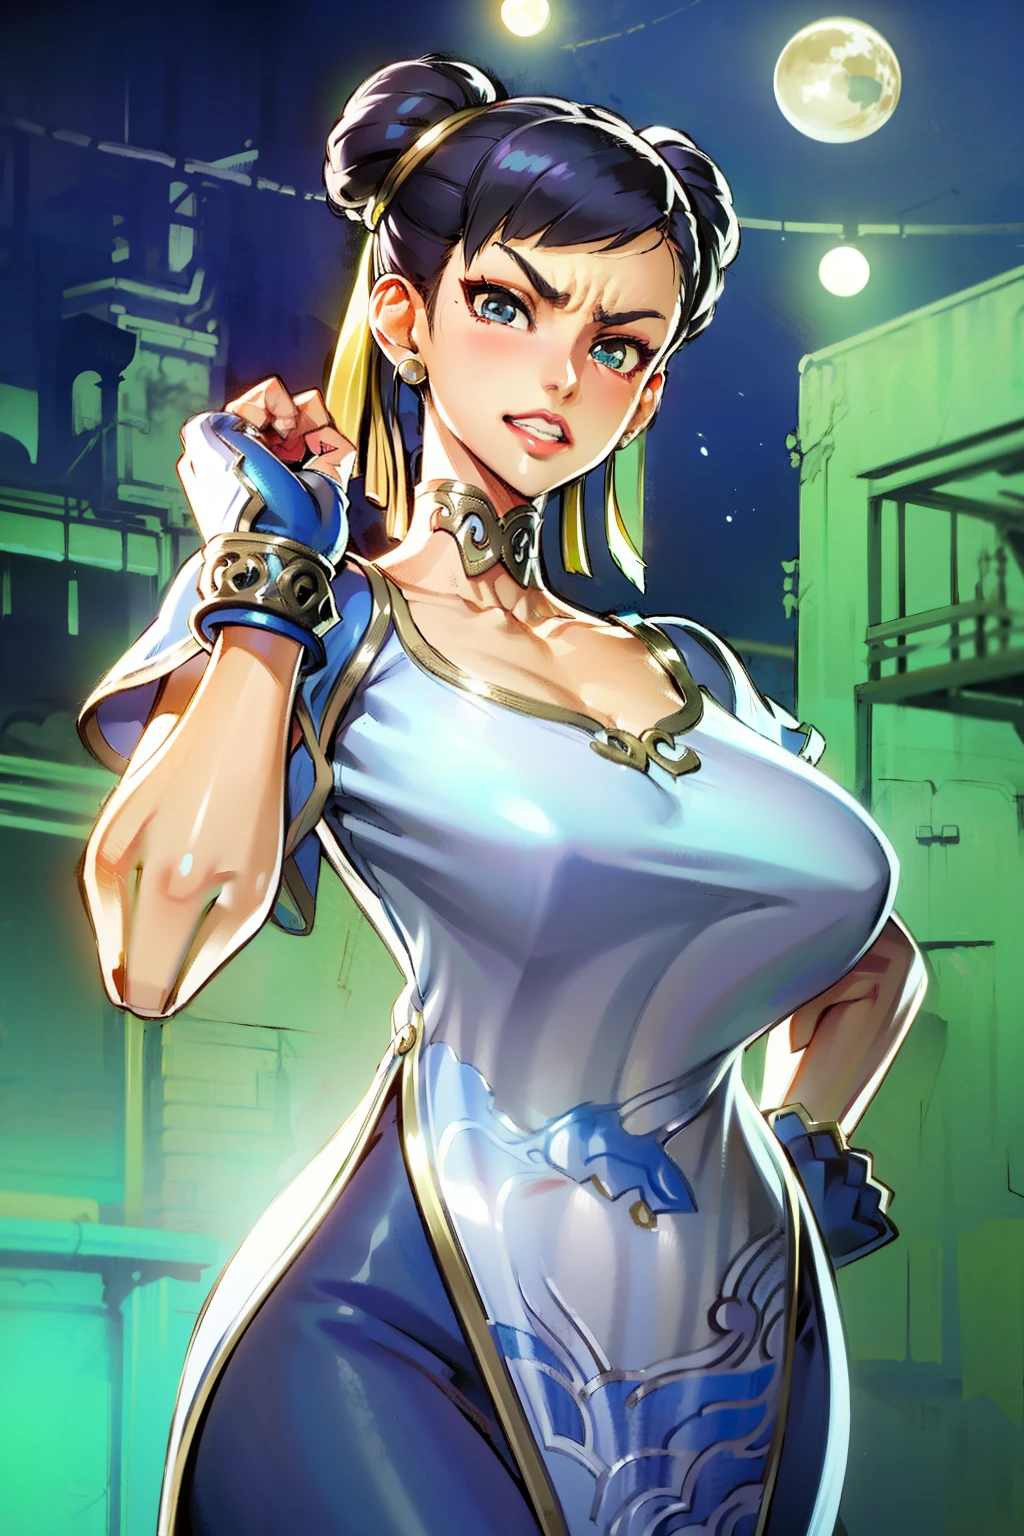 Waifu, masterpiece, curvy, breasts, moon, full moon, gloves, 1girl, clenched teeth, chun-li, cleavage, large breasts, teeth, aqua hair, red gloves, tank top, blue eyes, rating:explicit,rule34, hardcore, ,,clenched hands, punching, night, sky, jumpsuit, pants, bare shoulders, blue hair, clenched hand, rating:questionable, short hair, belt, green hair, solo, angry, orange gloves, lip biting(gigantic and massive tits:1.1), breasts, official illustration, illustration, detailed face, beautiful intricate eyes, curvy milf, 1:2), closeup, titsnipples